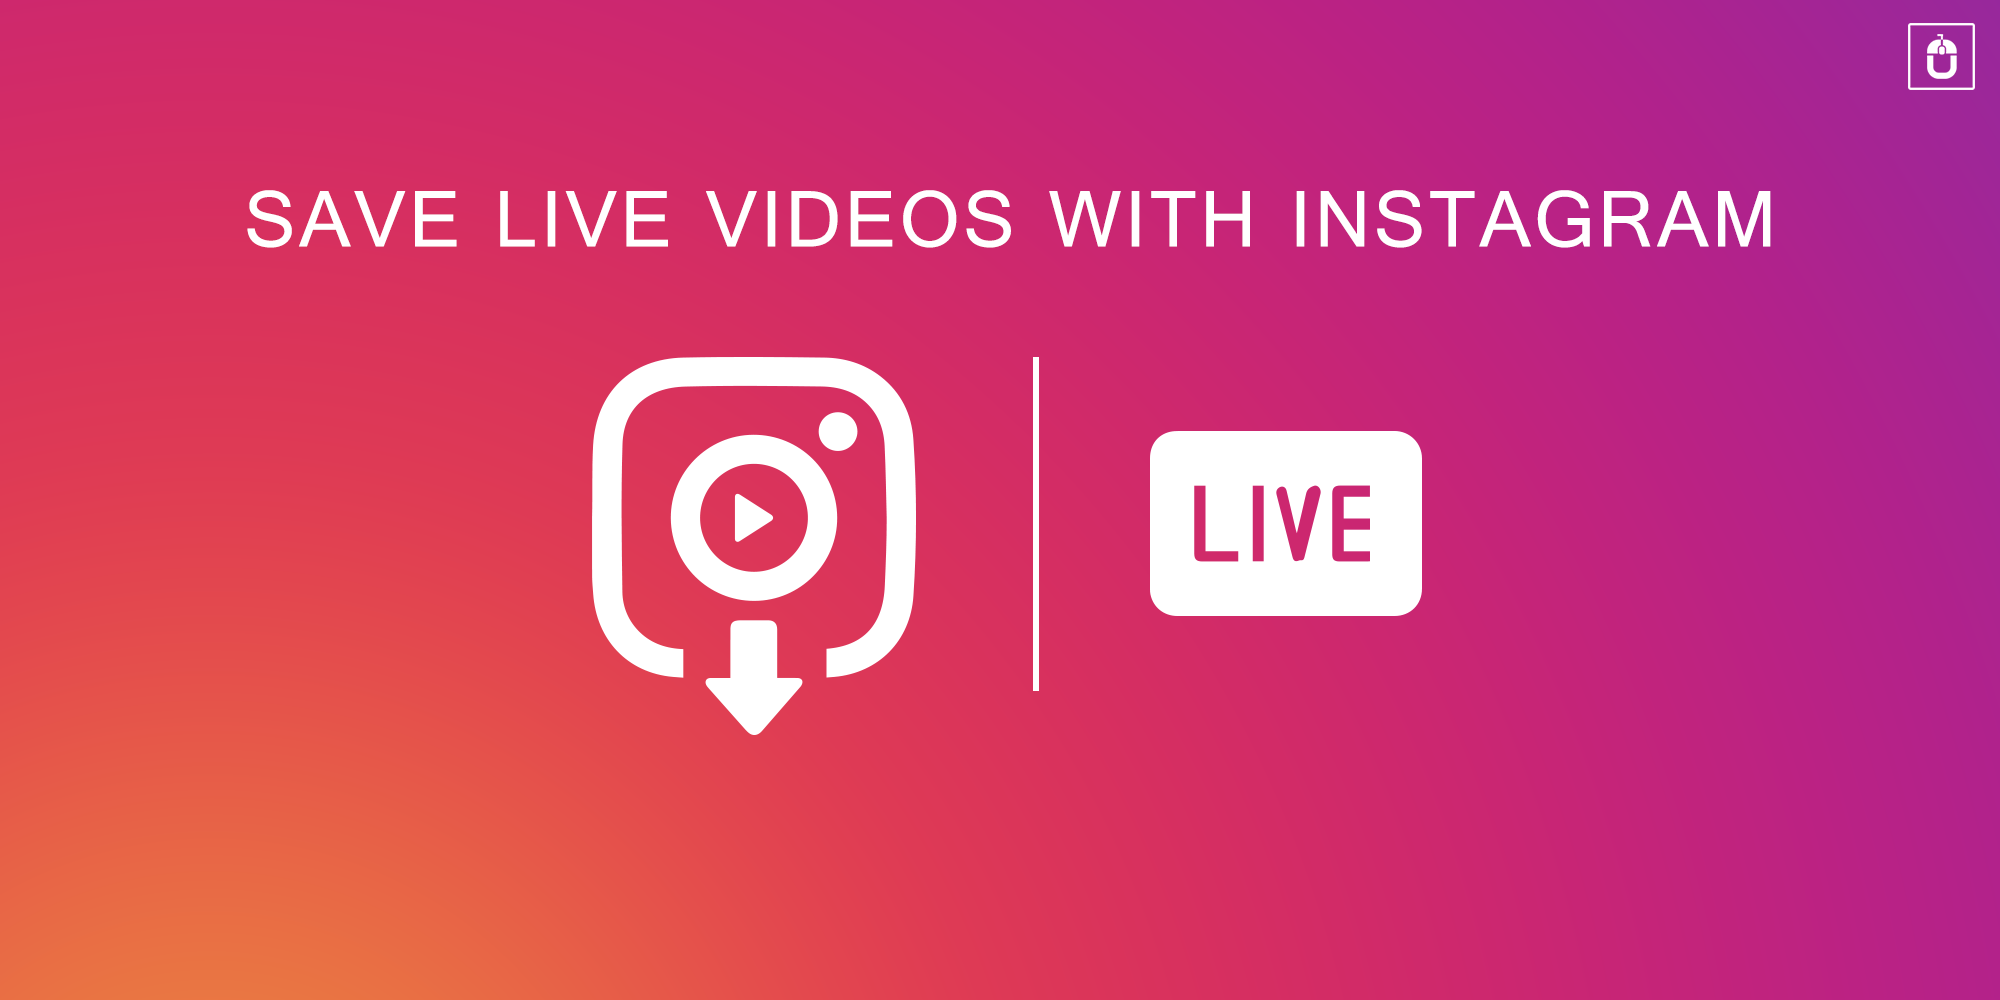 SAVE LIVE VIDEOS WITH INSTAGRAM